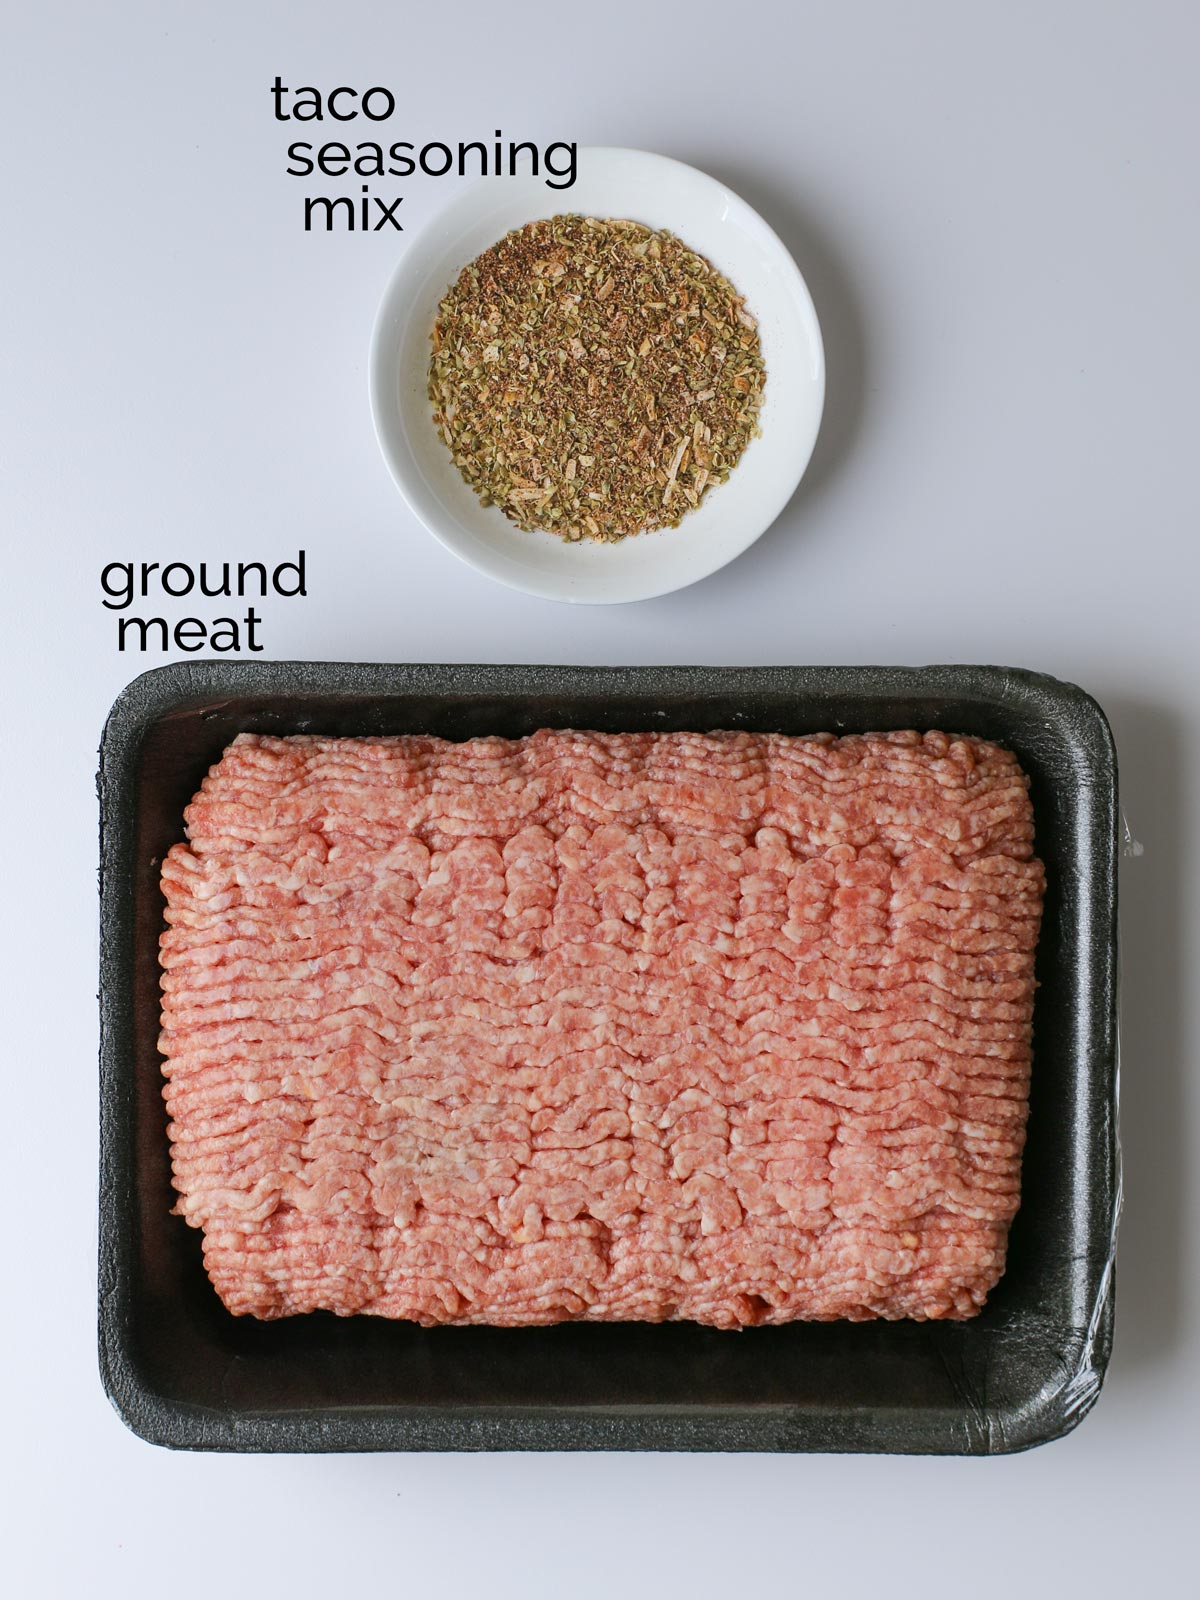 ground meat and taco seasoning mix on white counter.